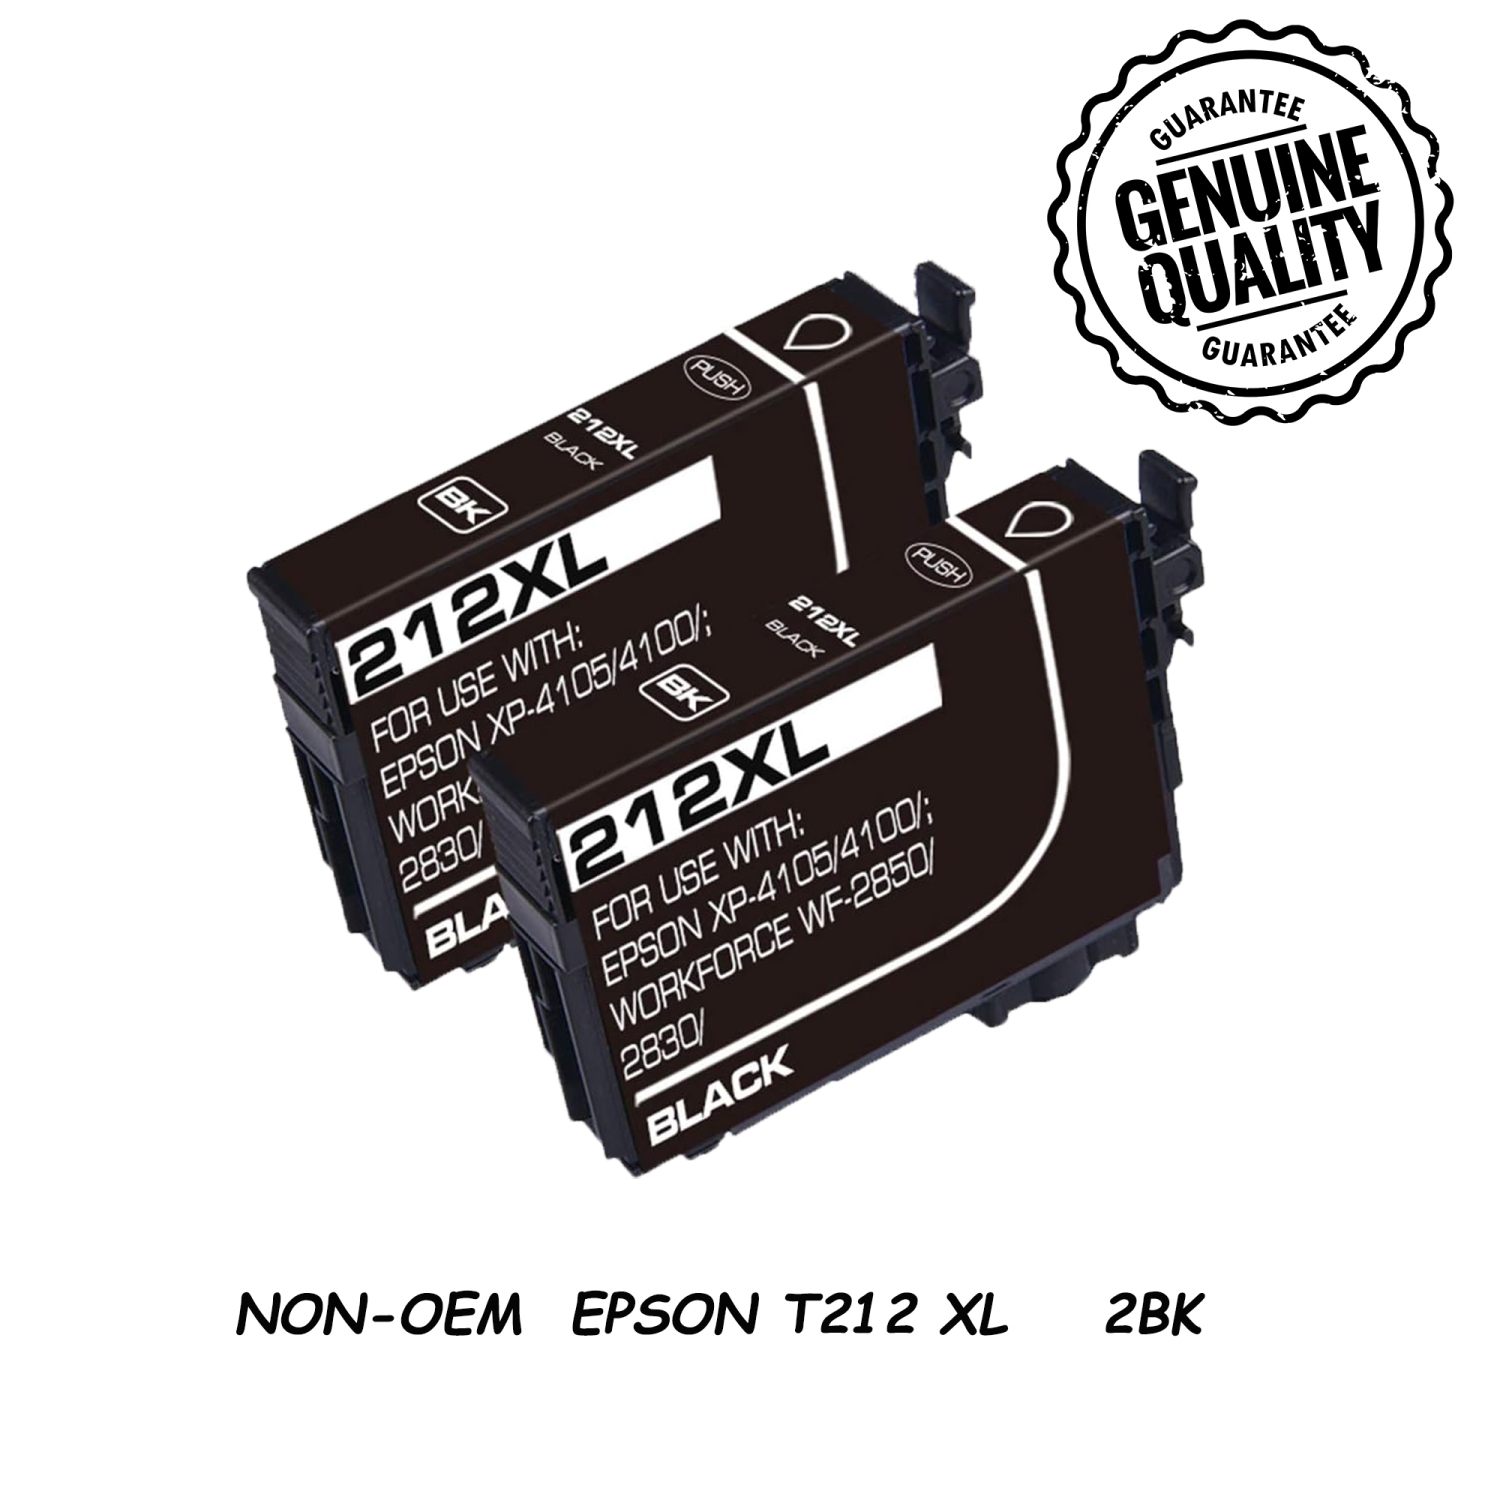 [New Chip] 2 Black Compatible Ink Cartridge Replacement for Epson T212 212 XL to use with Expression Home XP-4100 , EpsonWorkForce WF-2830 , WorkForce WF-2850